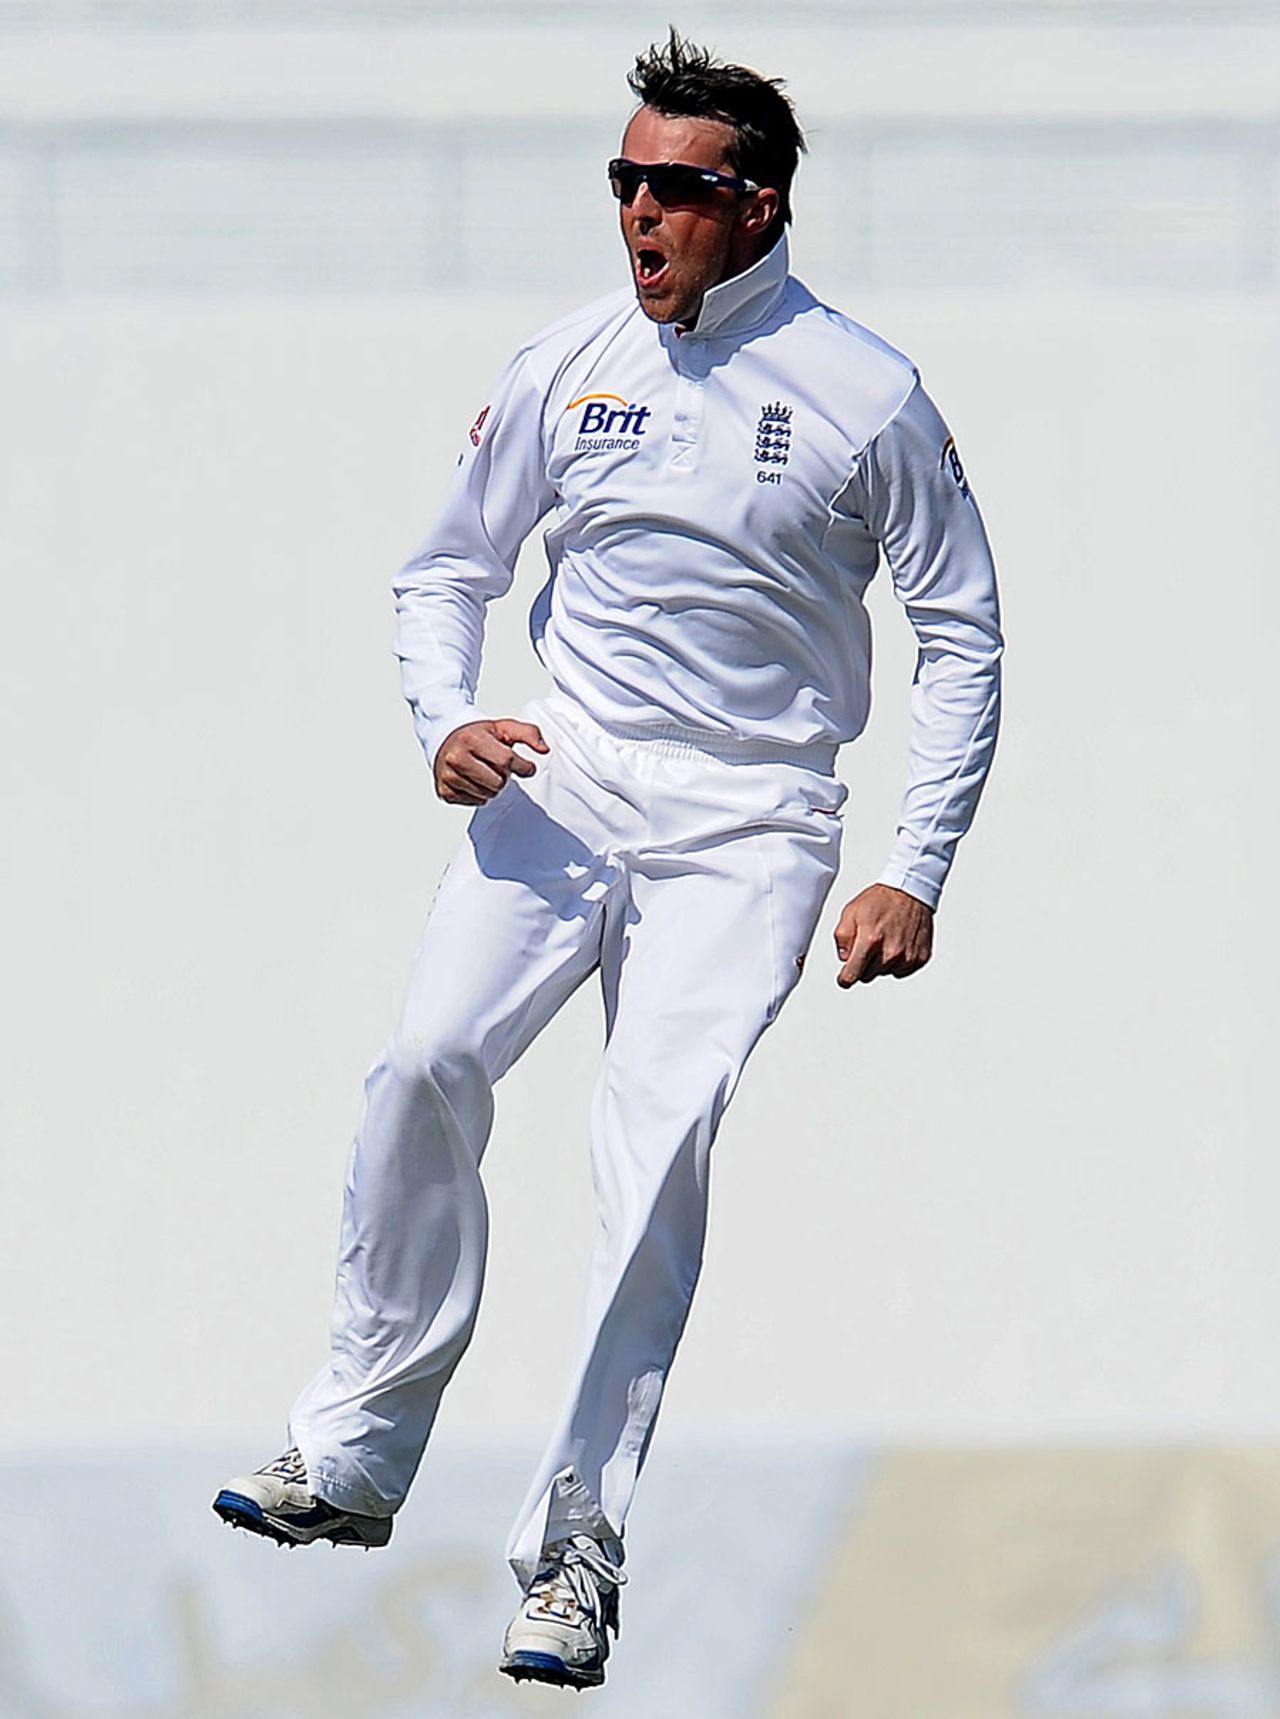 Graeme Swann is thrilled after bowling Taufeeq Umar for the second time, Pakistan v England, 2nd Test, Abu Dhabi, 3rd Day, January 27, 2012